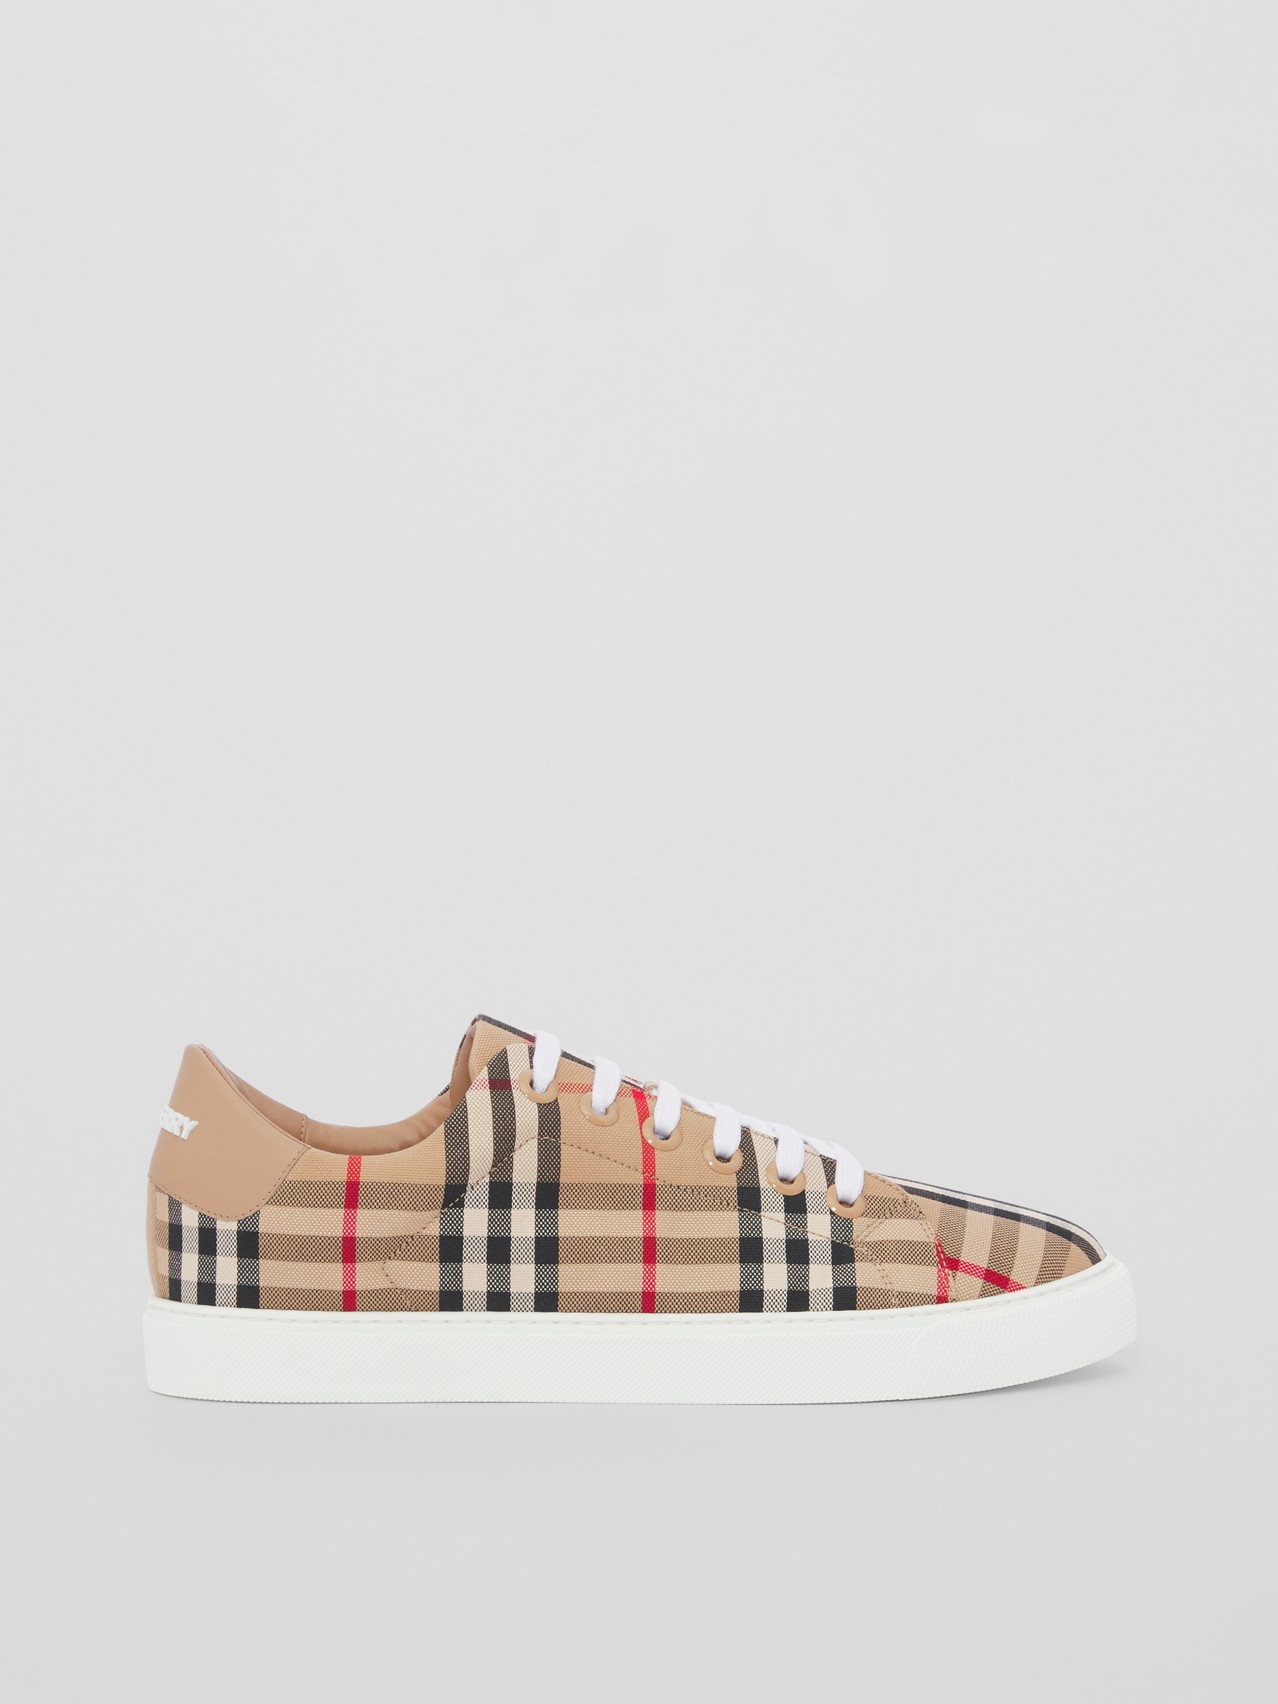 Vintage Check and Leather Sneakers by Burberry, available on burberry.com for $420 Bella Hadid Shoes SIMILAR PRODUCT